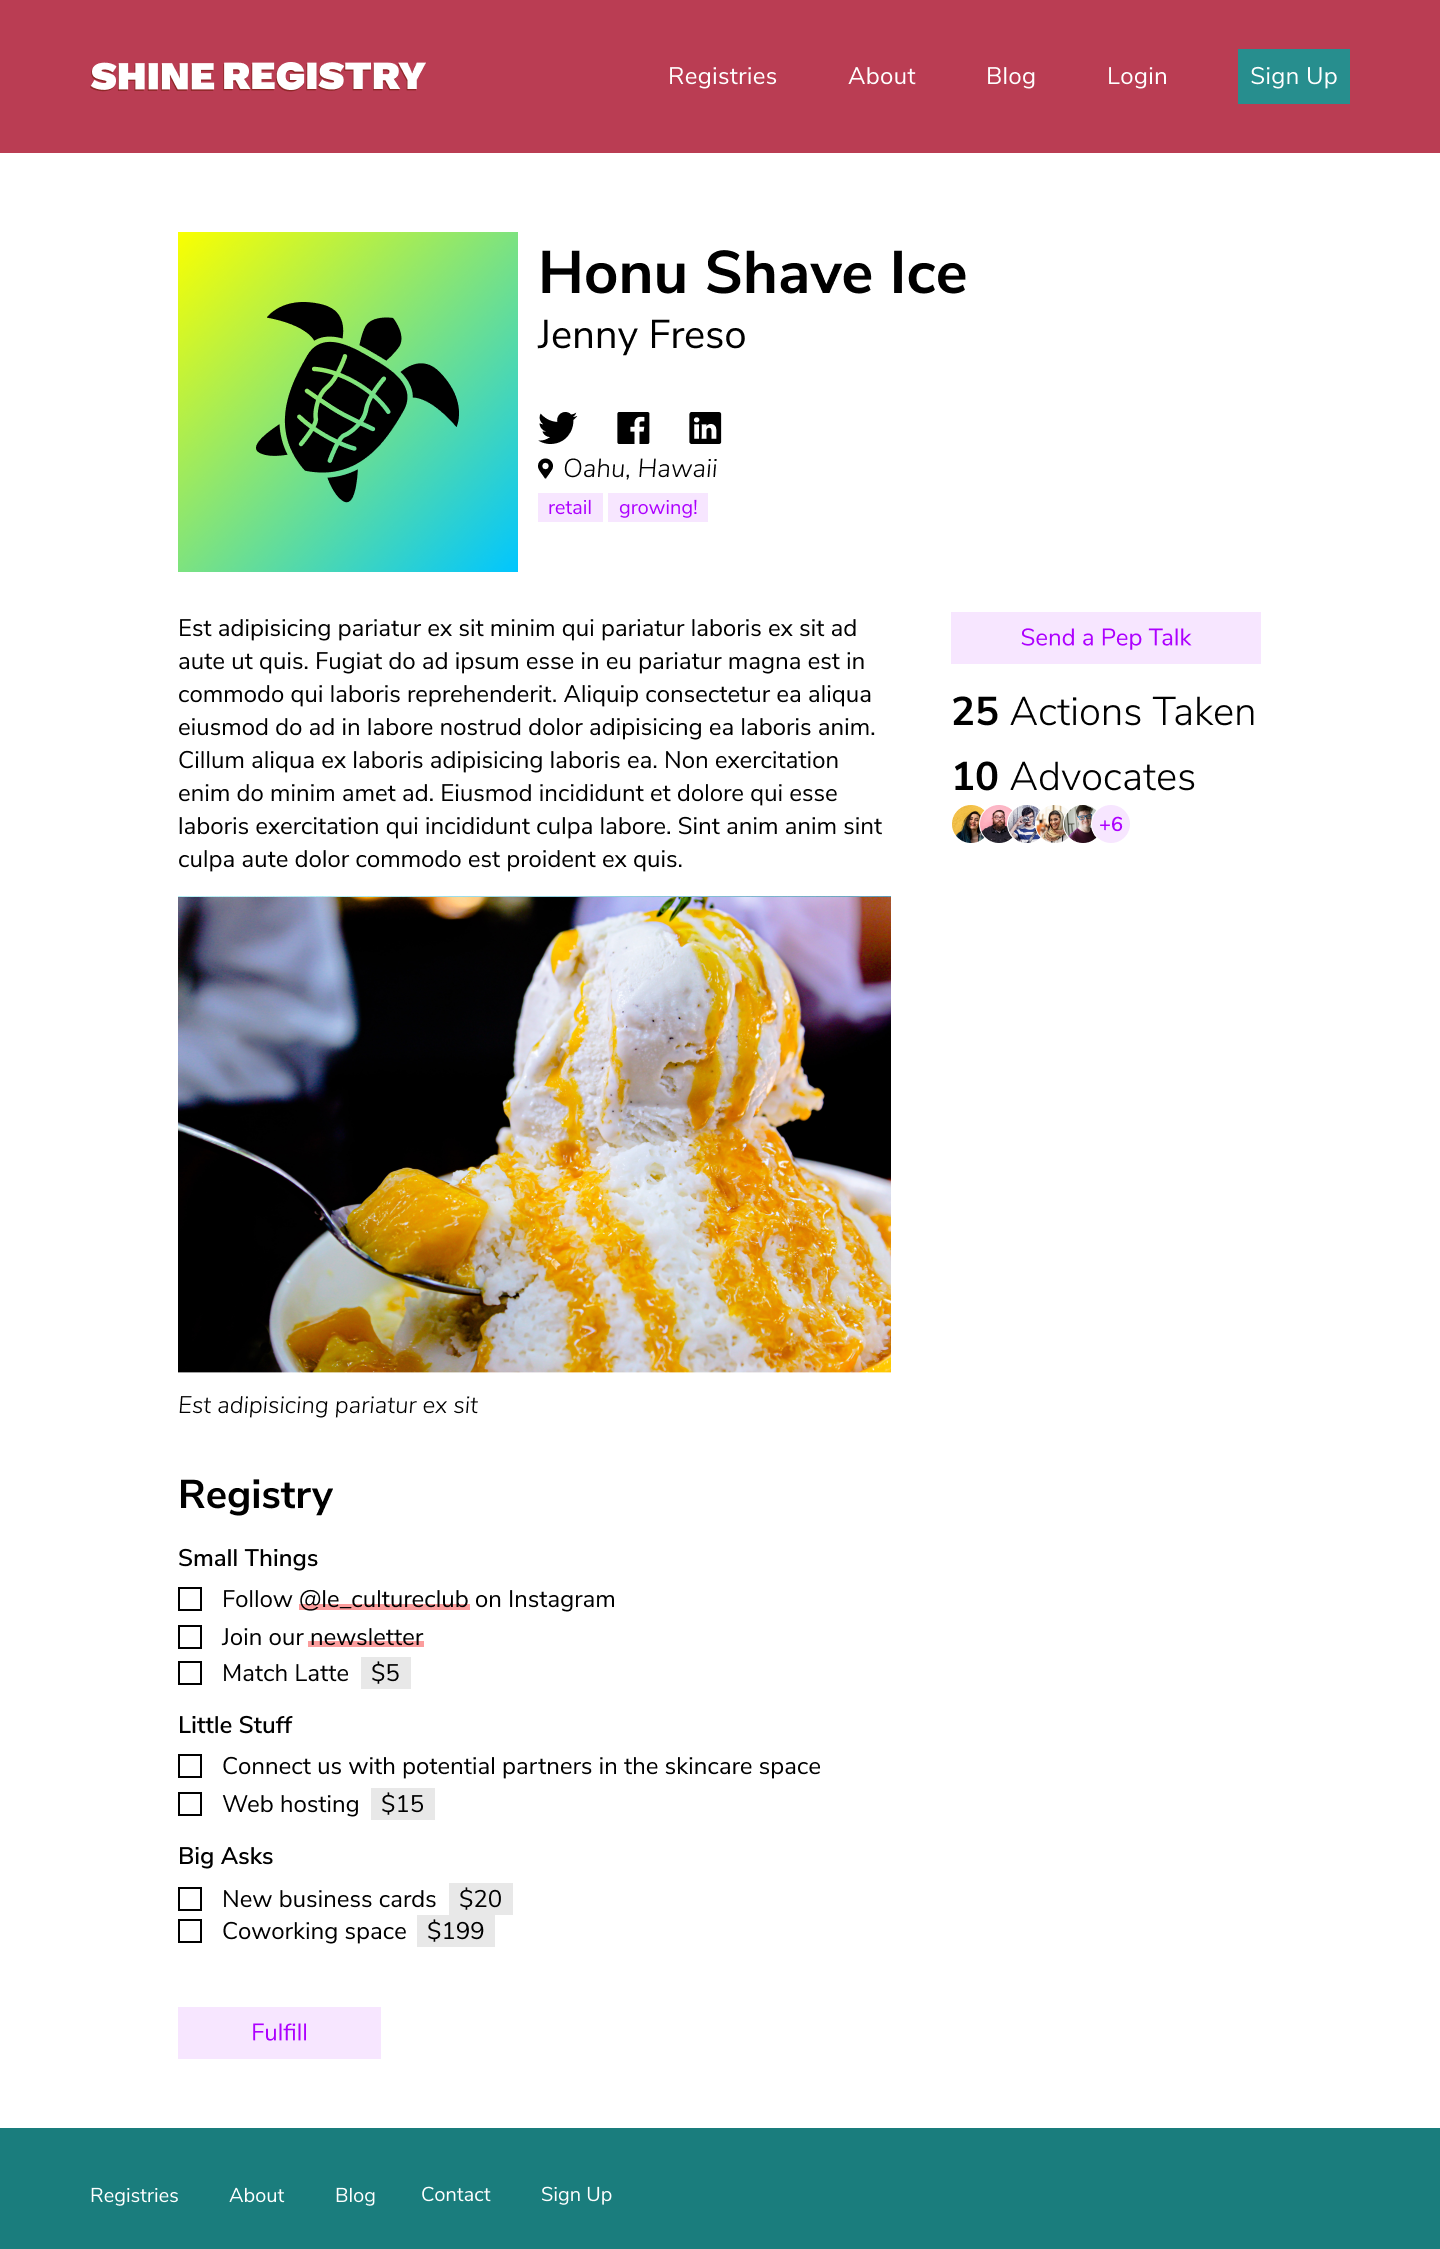 Honu Shave Ice Registry Page